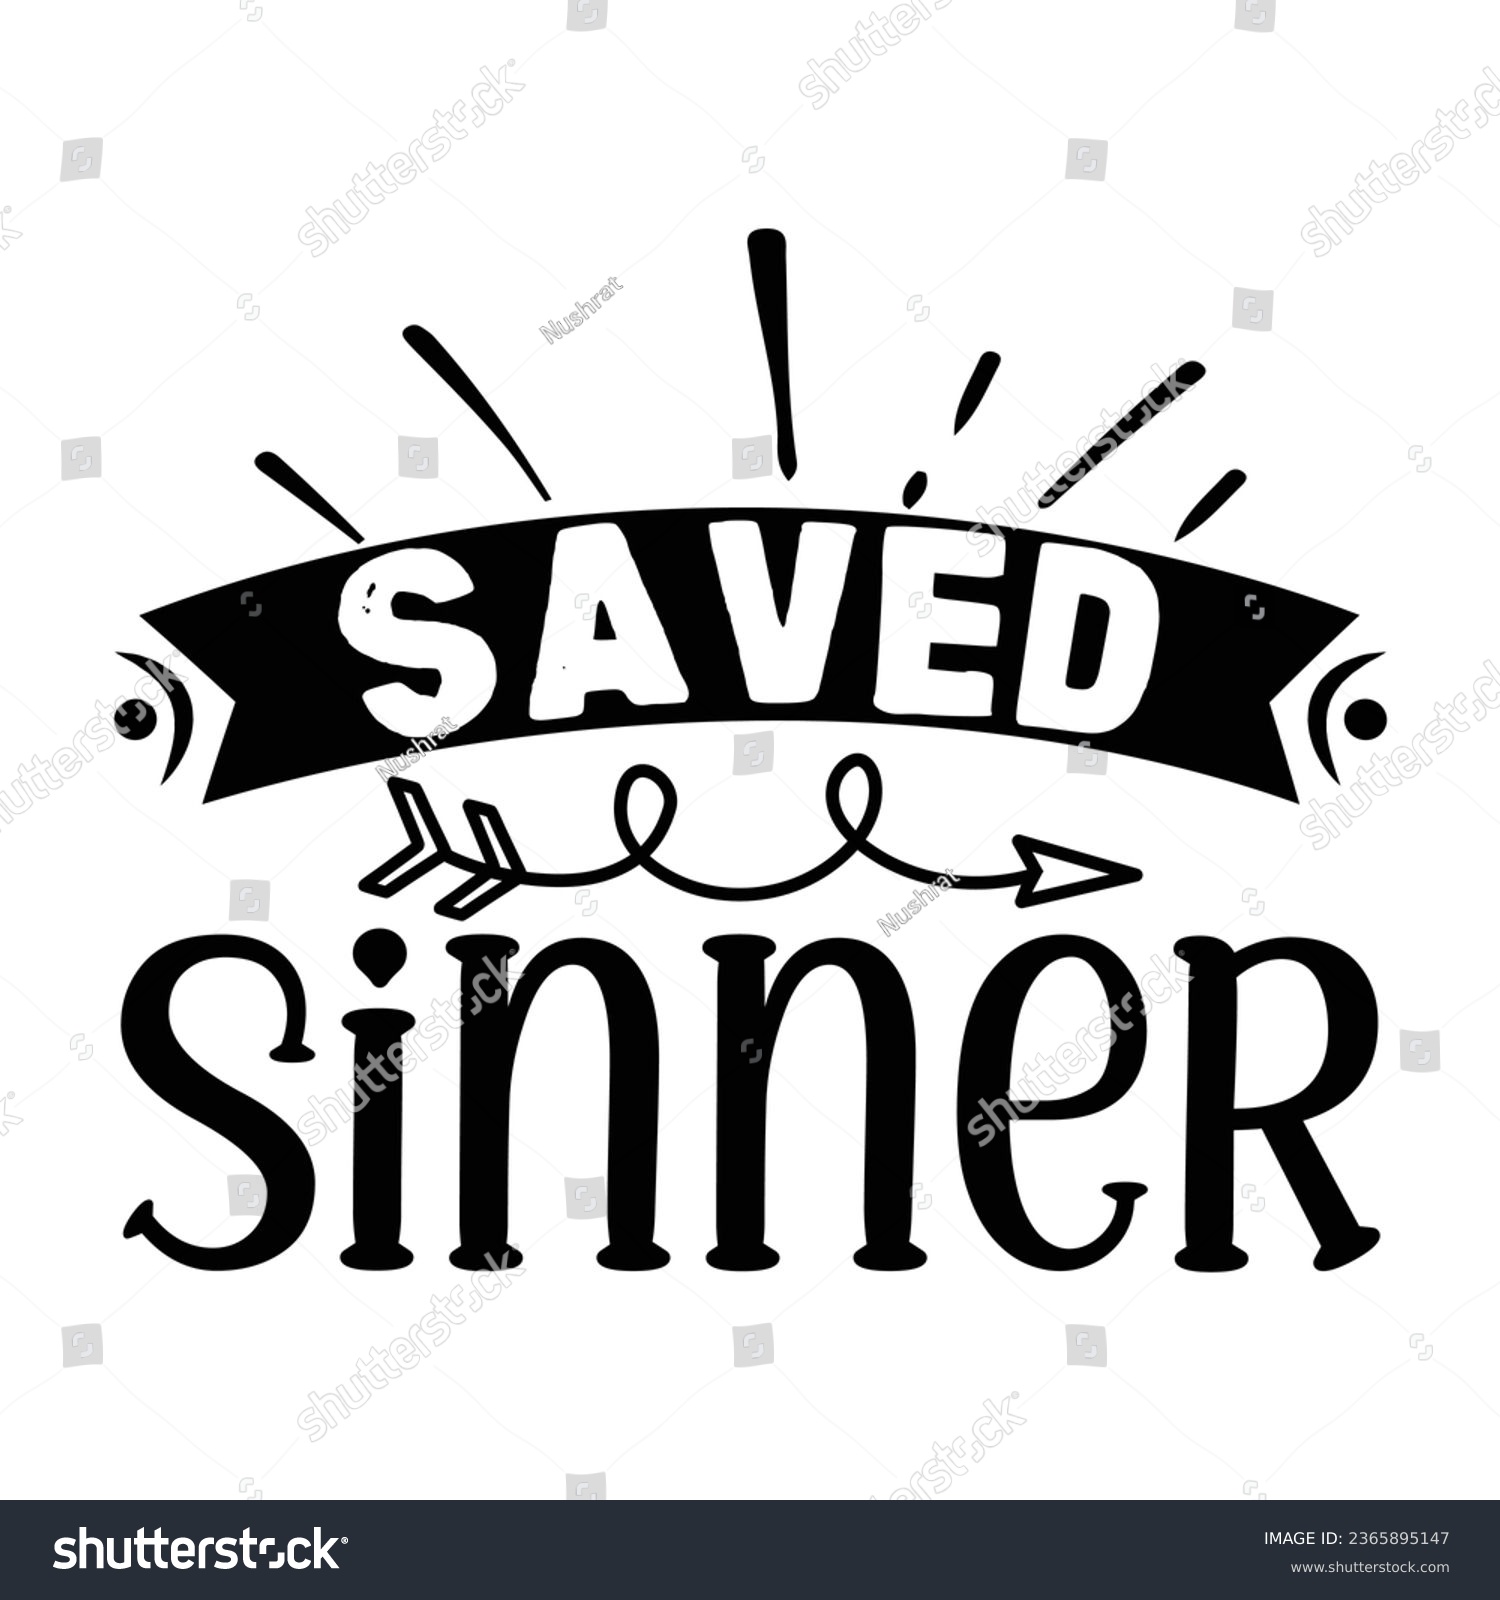 SVG of Saved Sinner, Christian quotes  cut files Design, Christian quotes t shirt designs Template svg